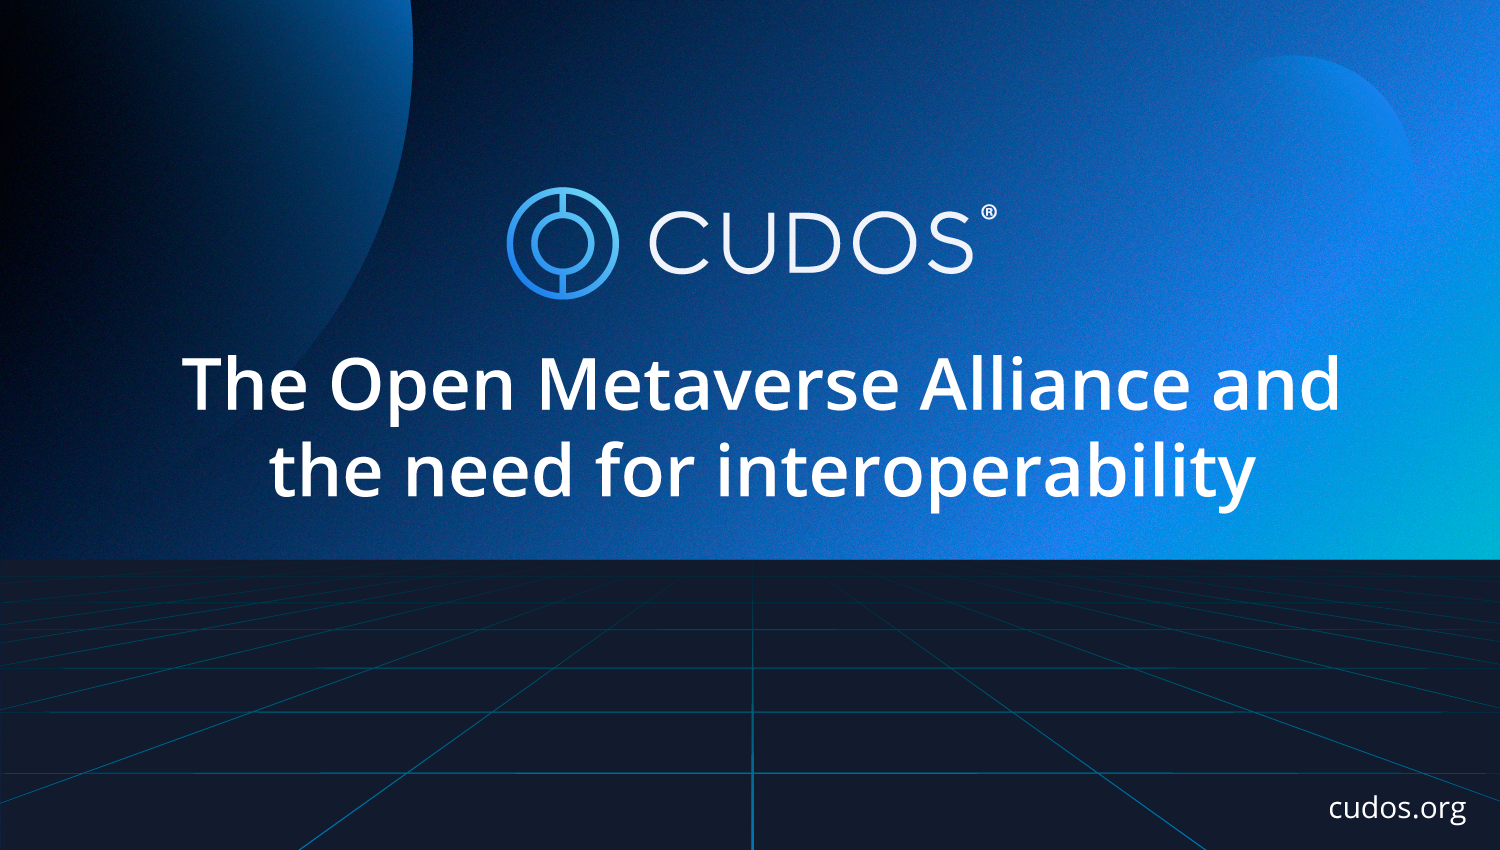 The Open Metaverse Alliance and the need for interoperability